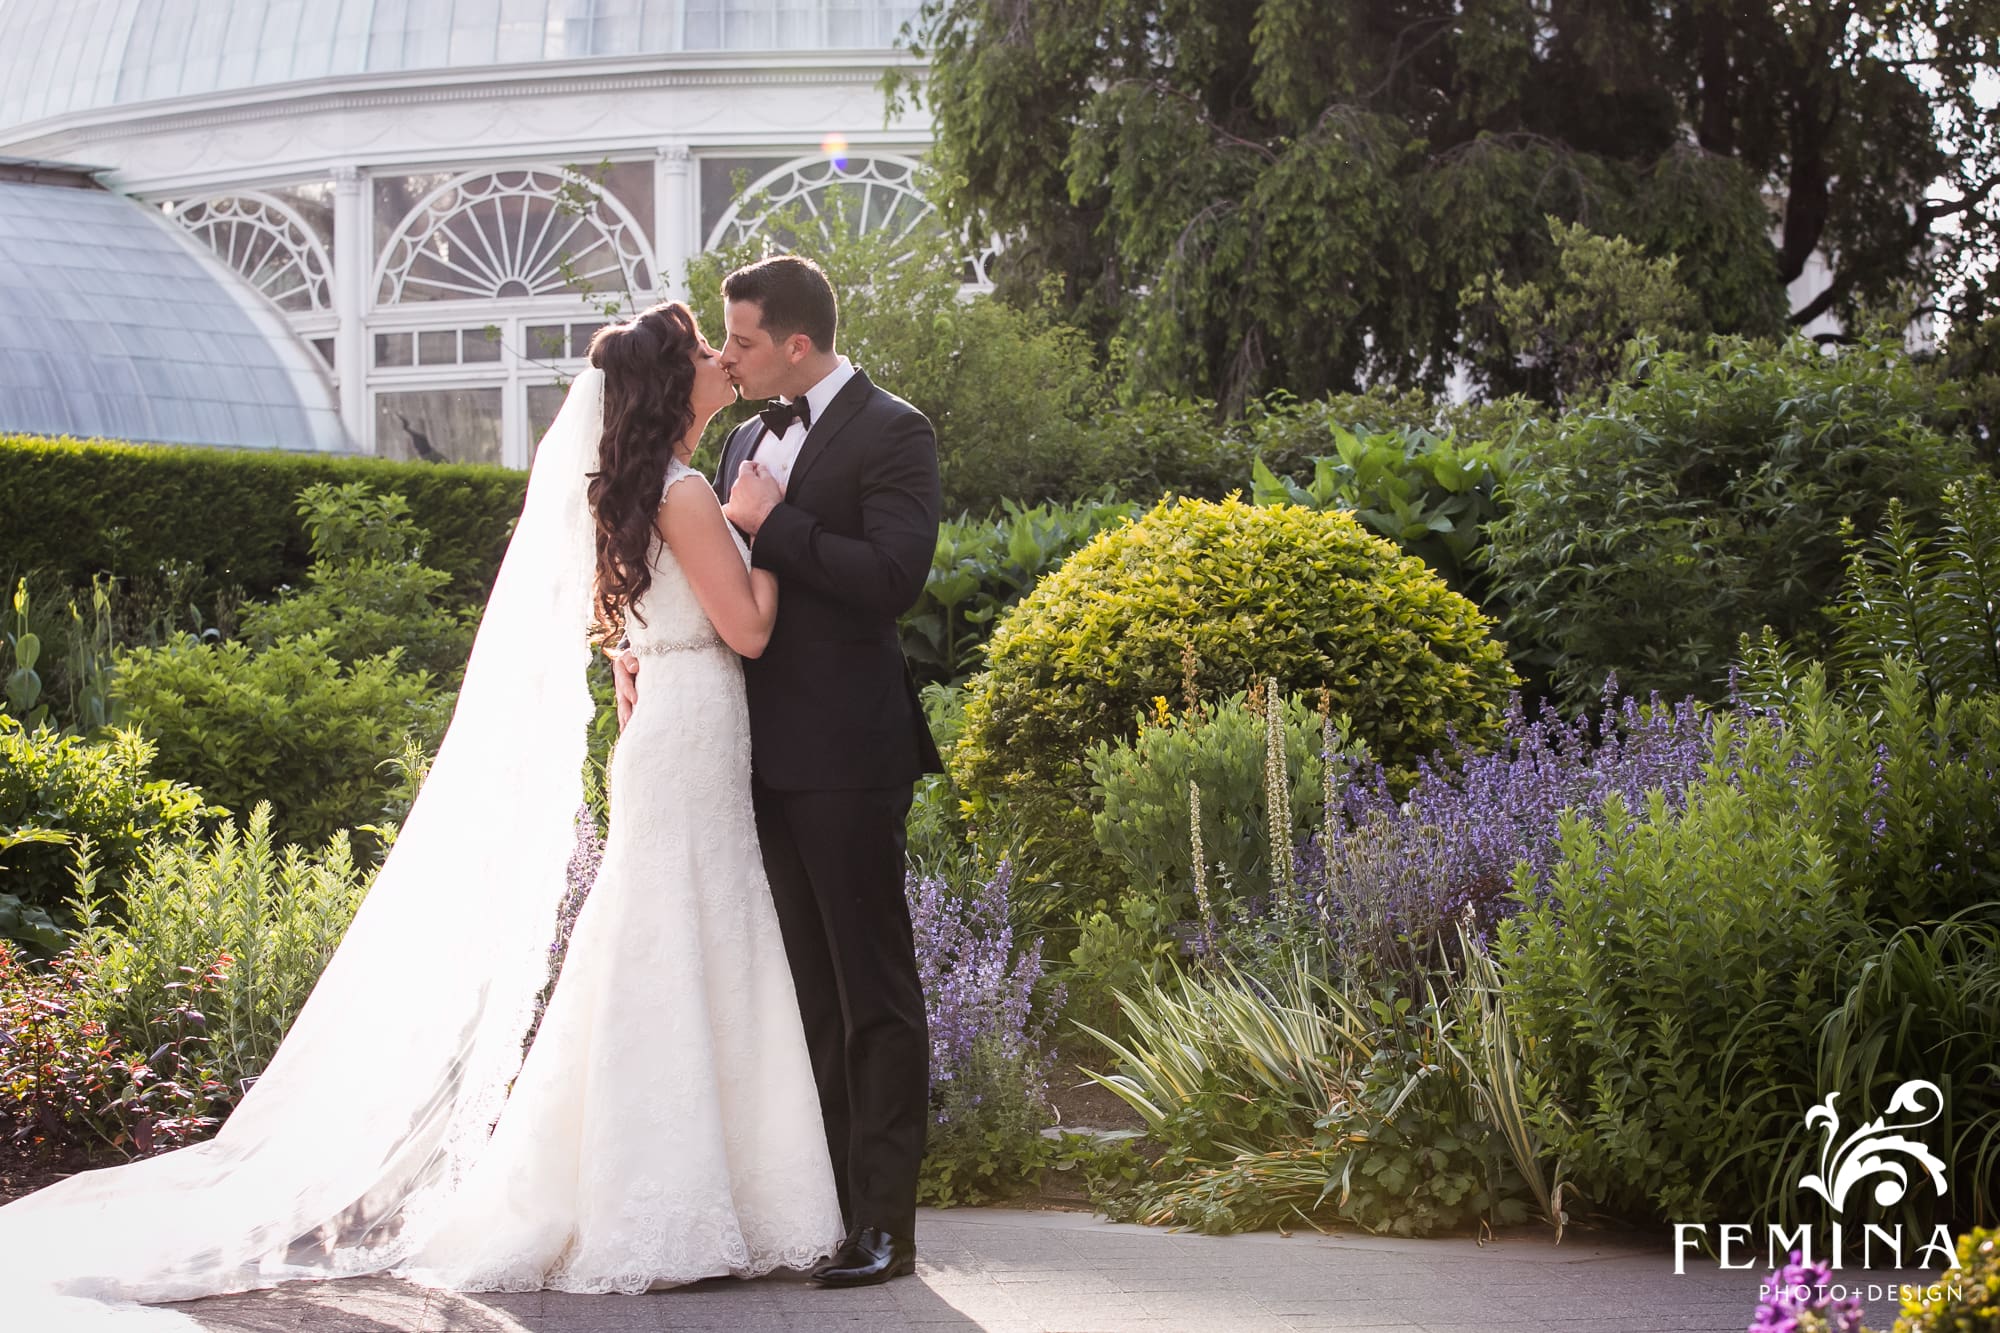 Ryan and Christina have an intimate moment in the gardens at the New York Botanical Garden